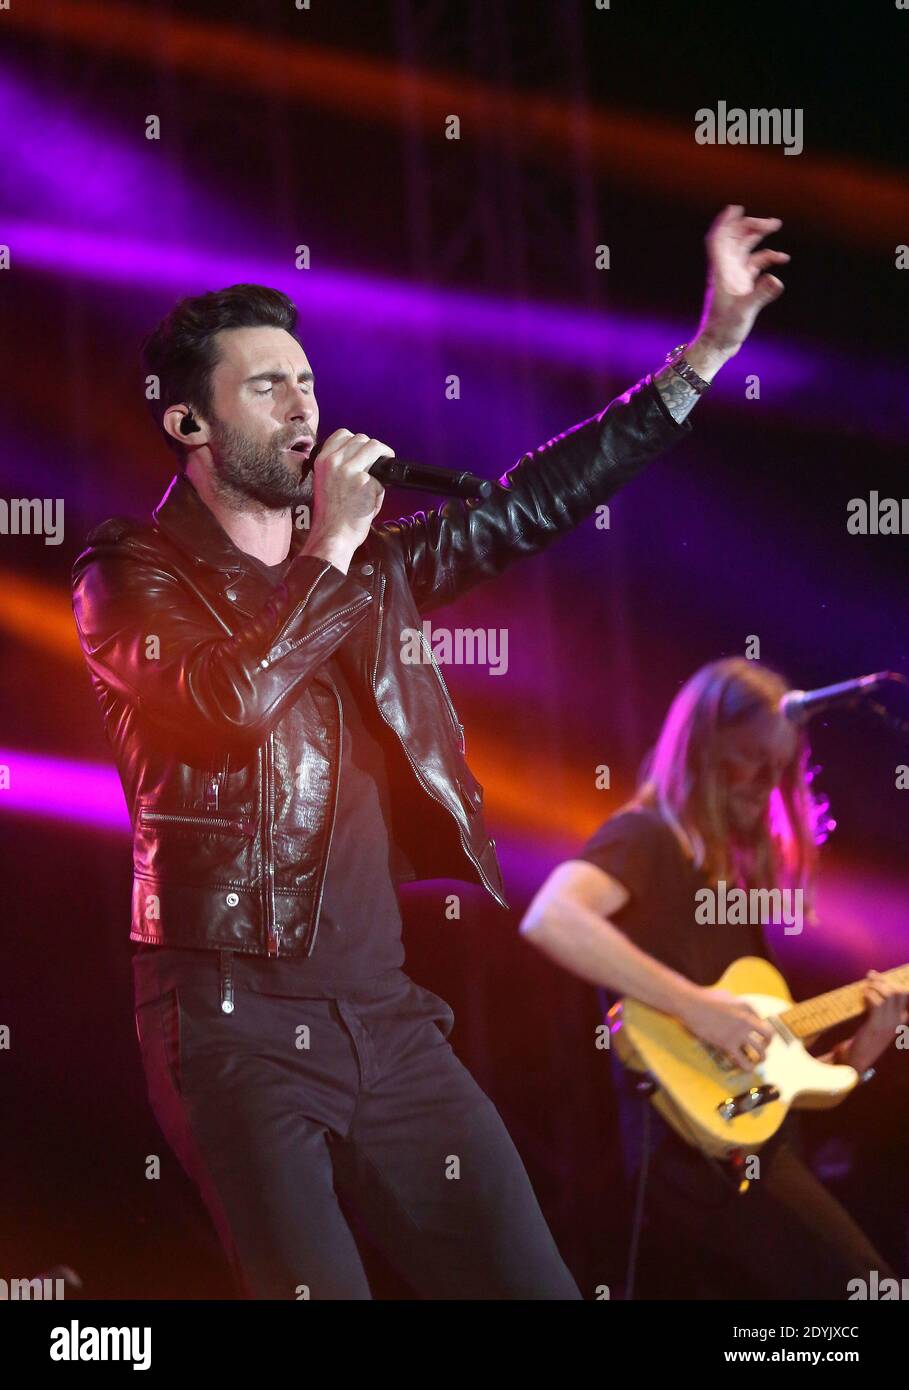 Adam Levine of Maroon 5 performs during the 102.7 KIIS FM's Wango Tango held at The Home Depot Center in Carson, CA, USA on May 11, 2013. Photo by Krista Kennell/ABACAPRESS.COM Stock Photo